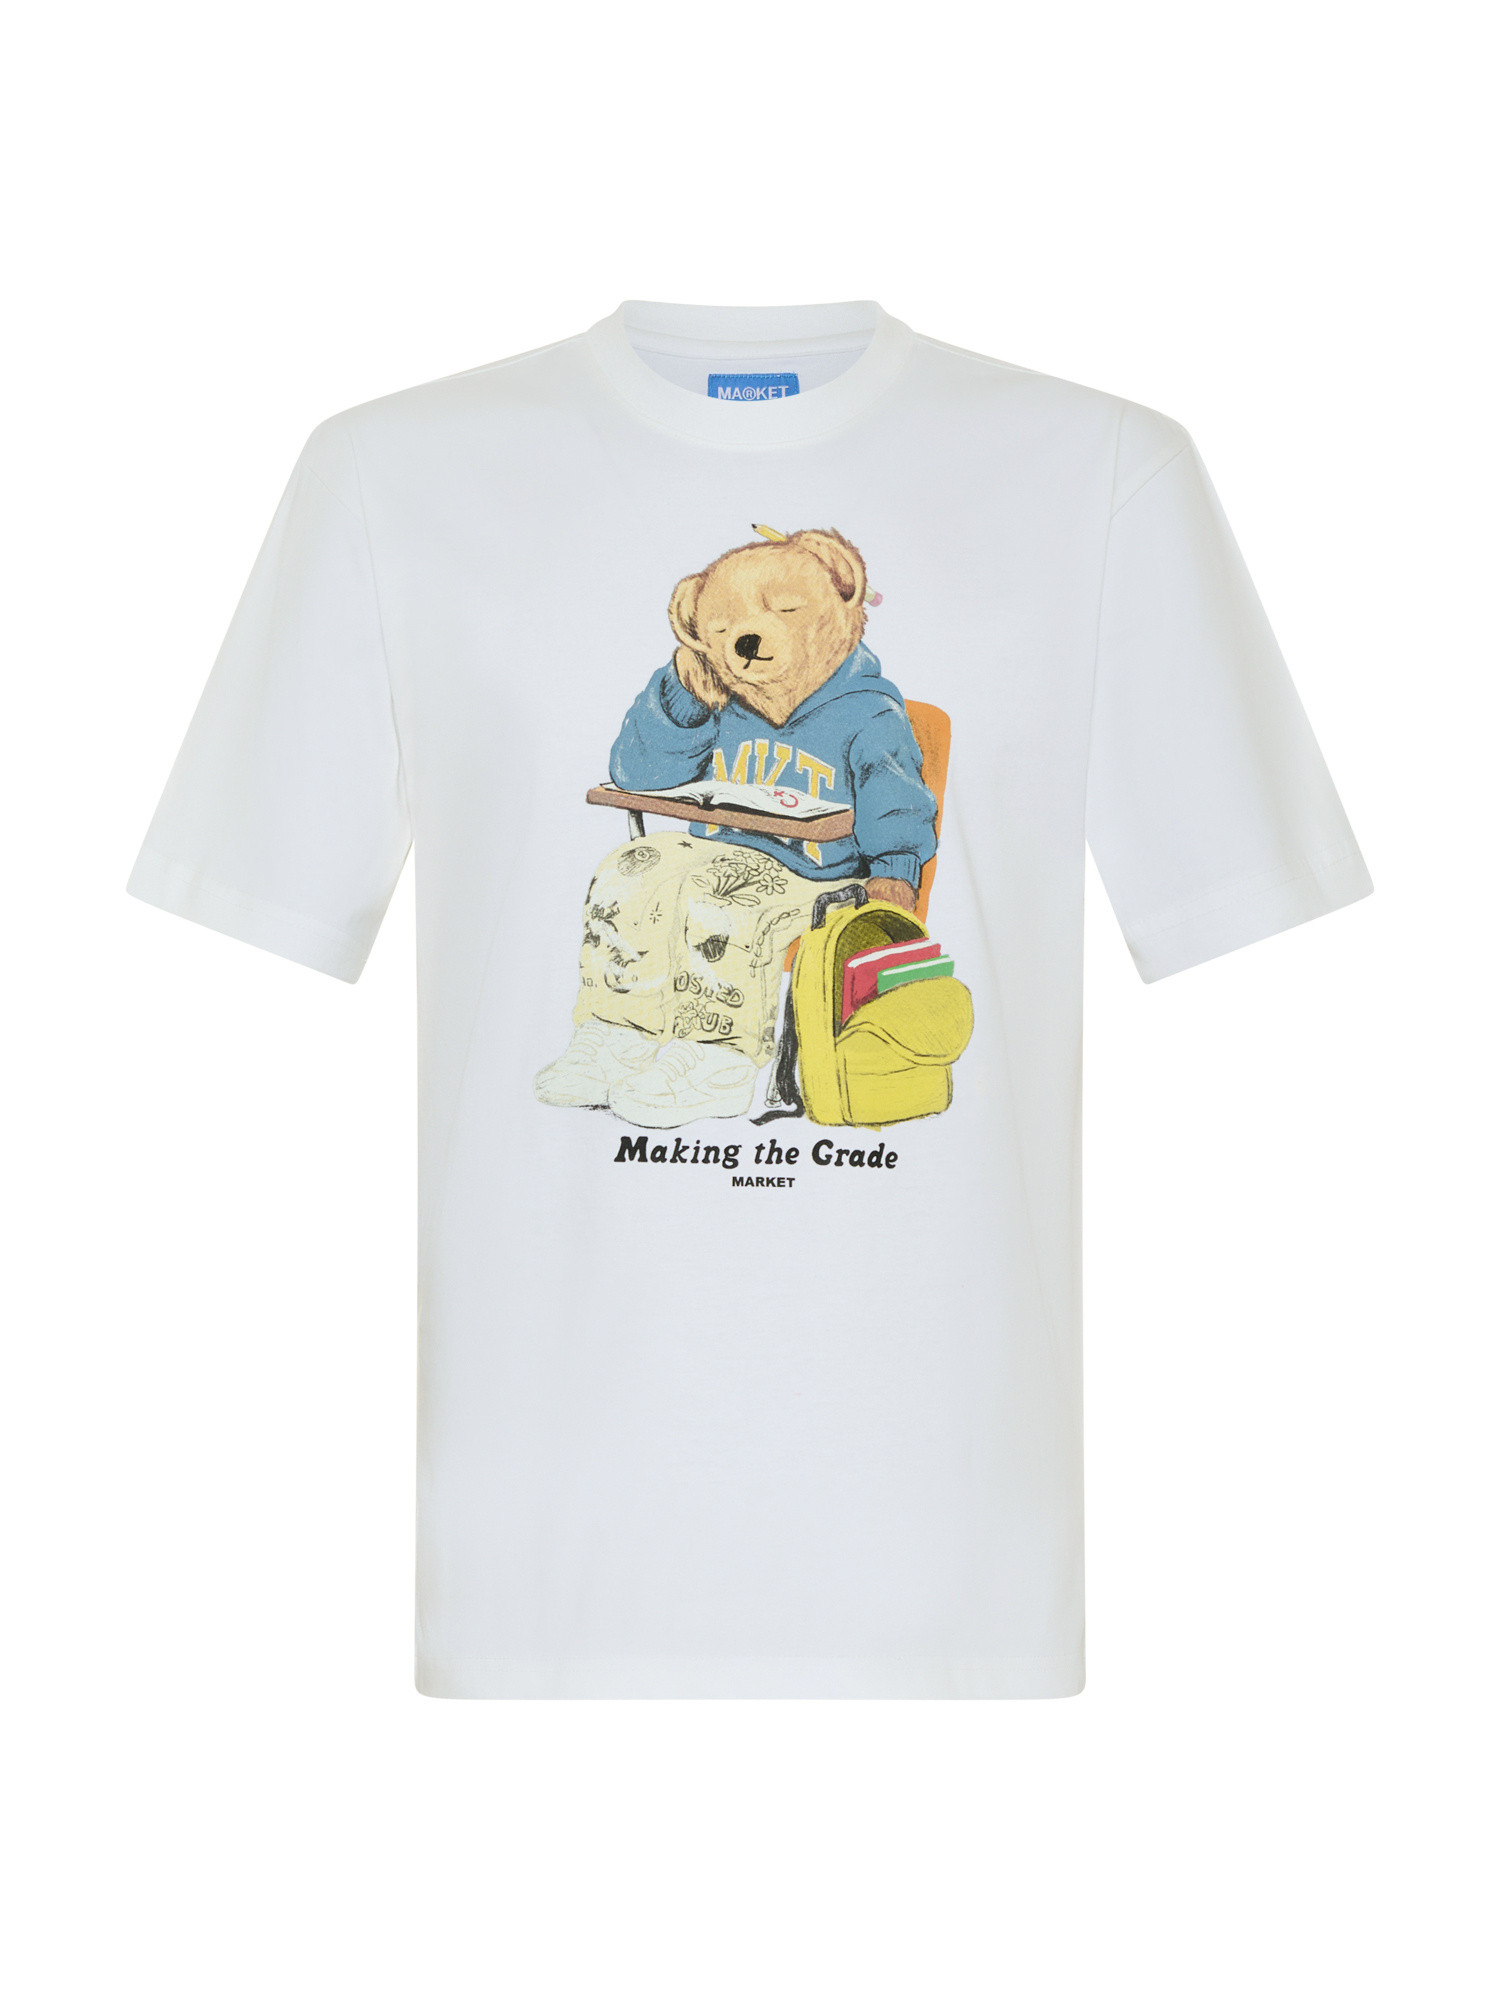 Market - T-shirt in cotone con stampa, Bianco, large image number 0